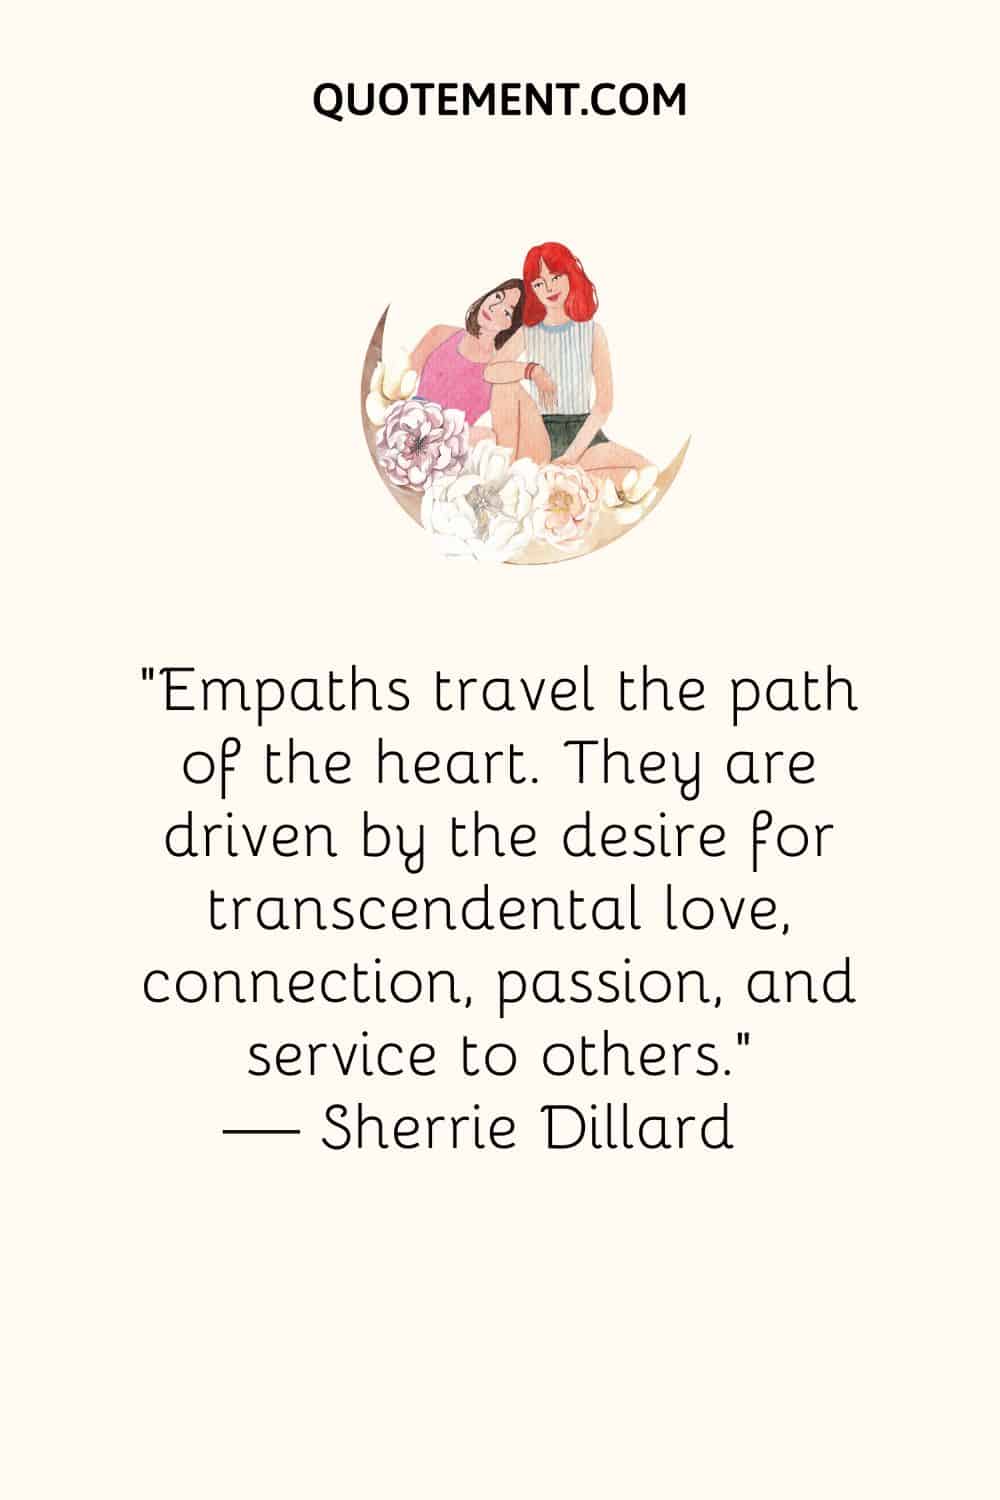 Empaths travel the path of the heart